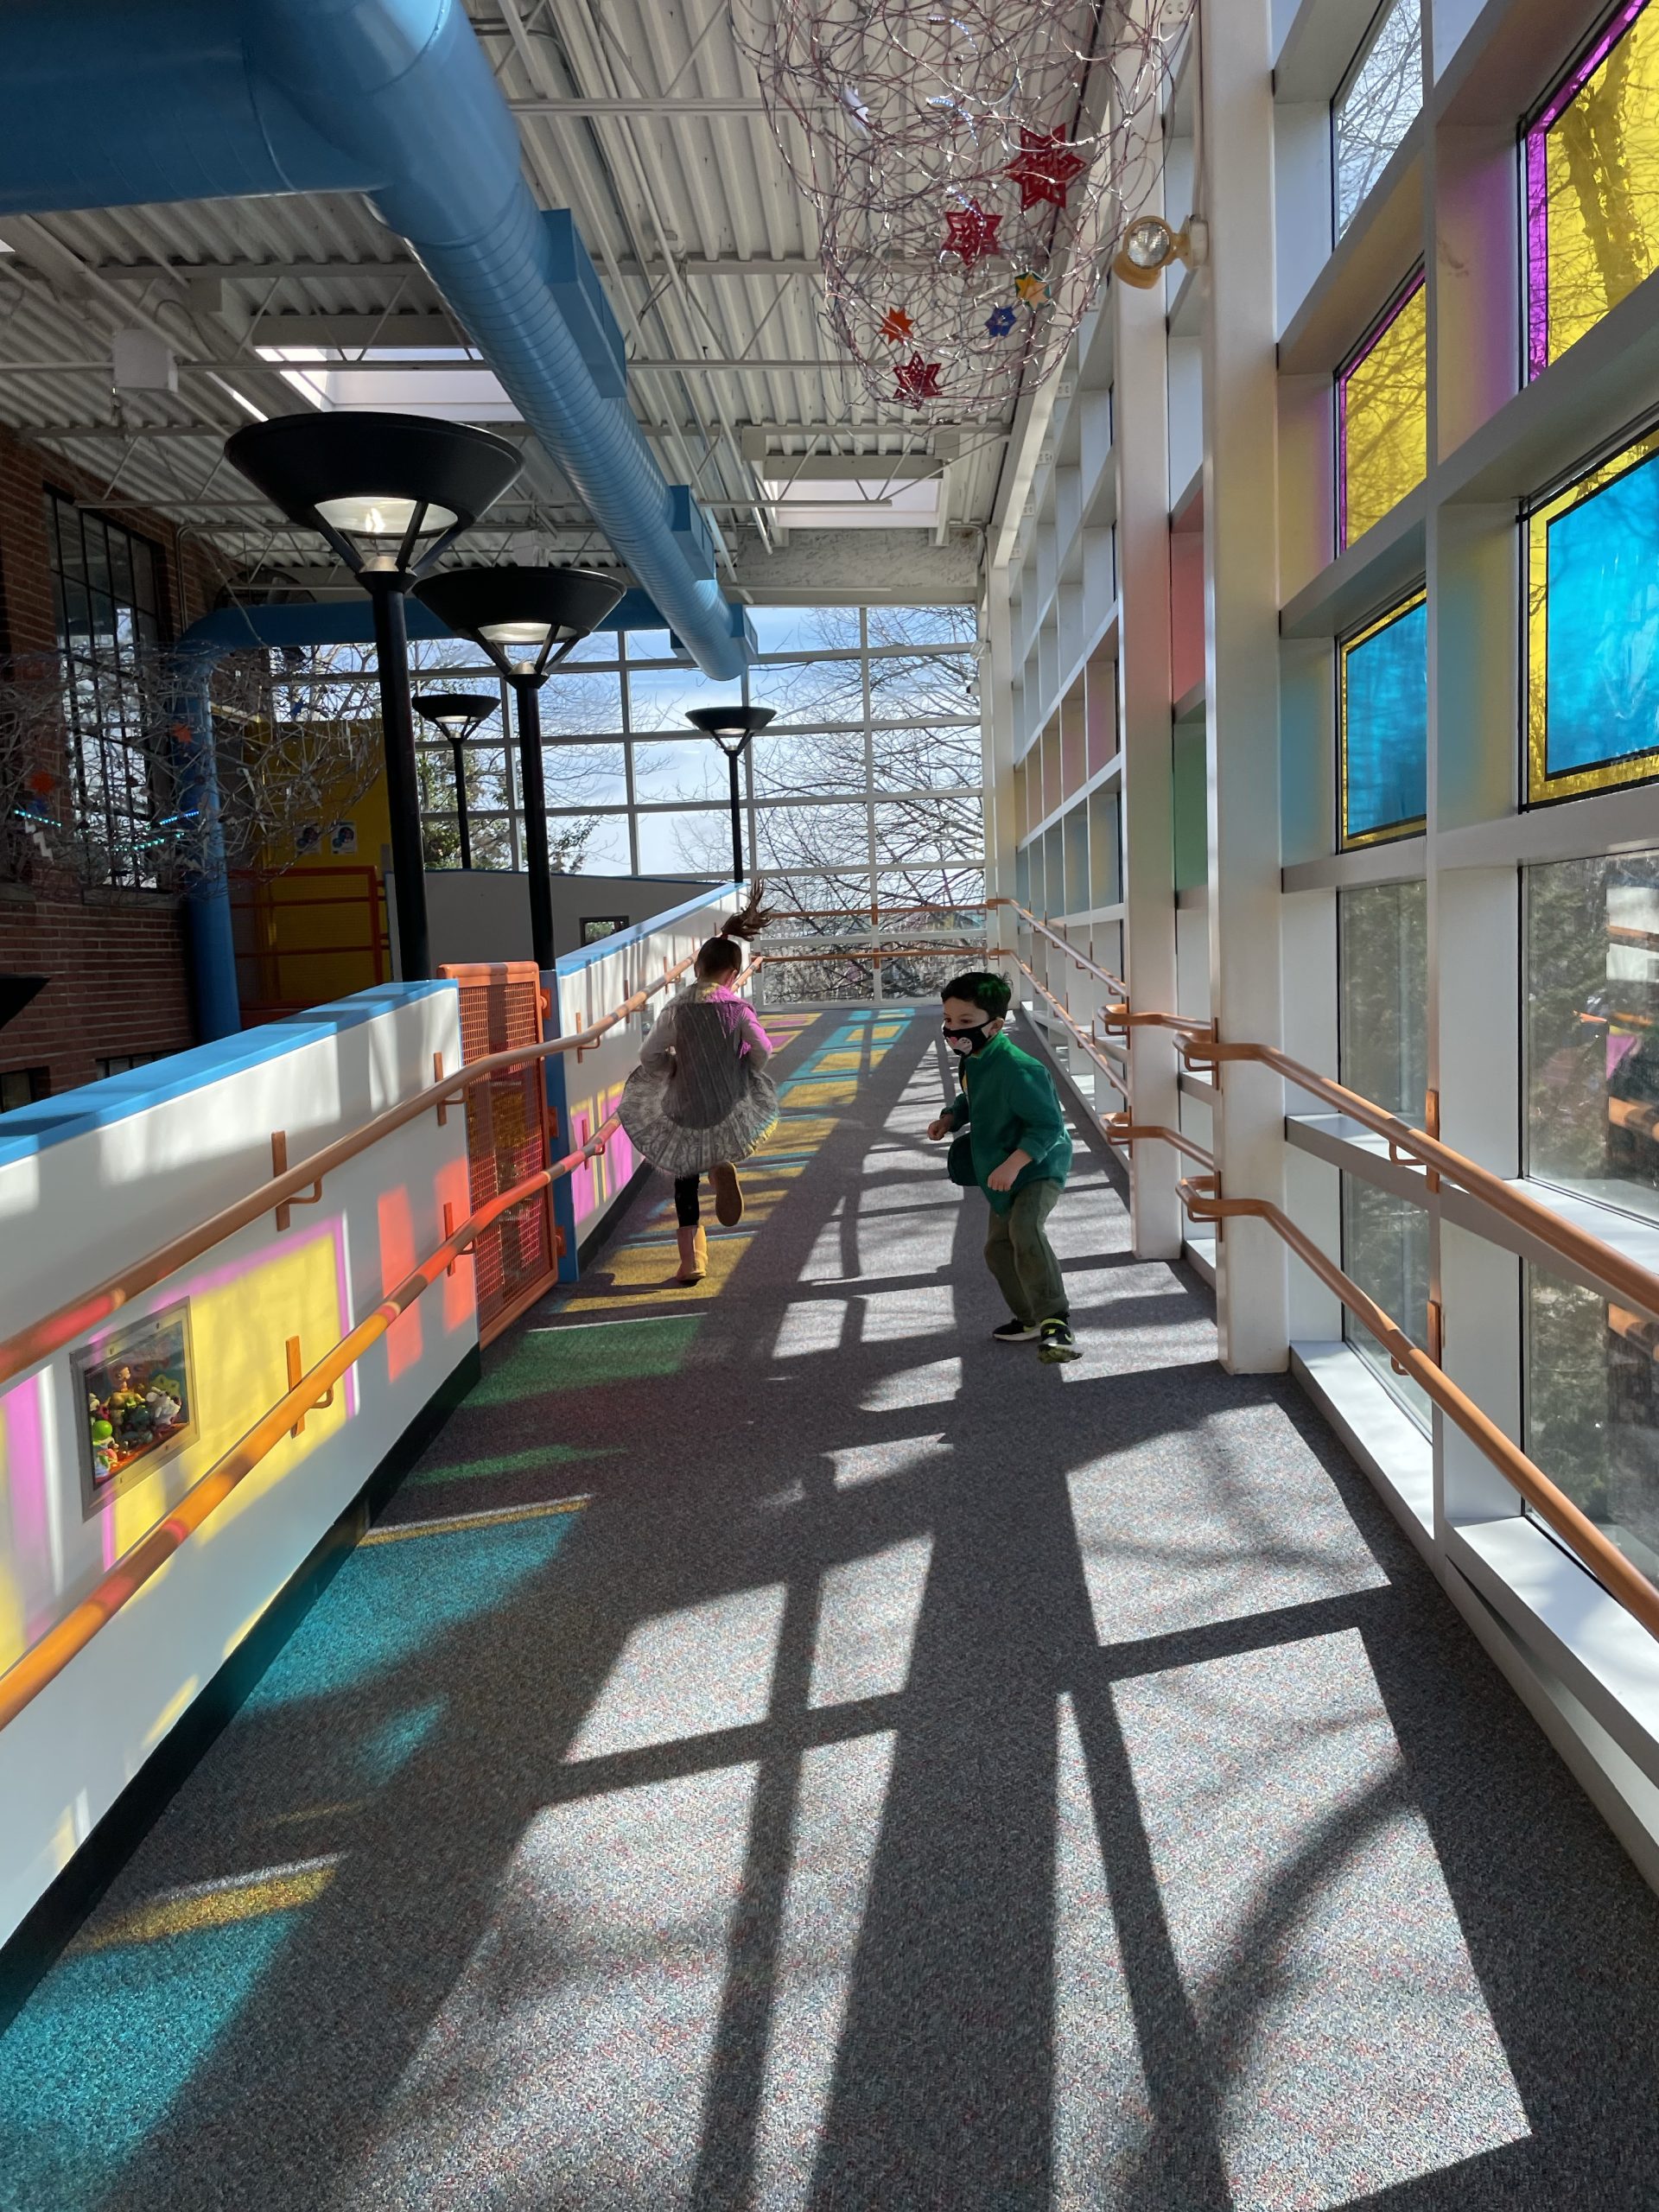  Providence Children's Museum in Rhode Island with kids